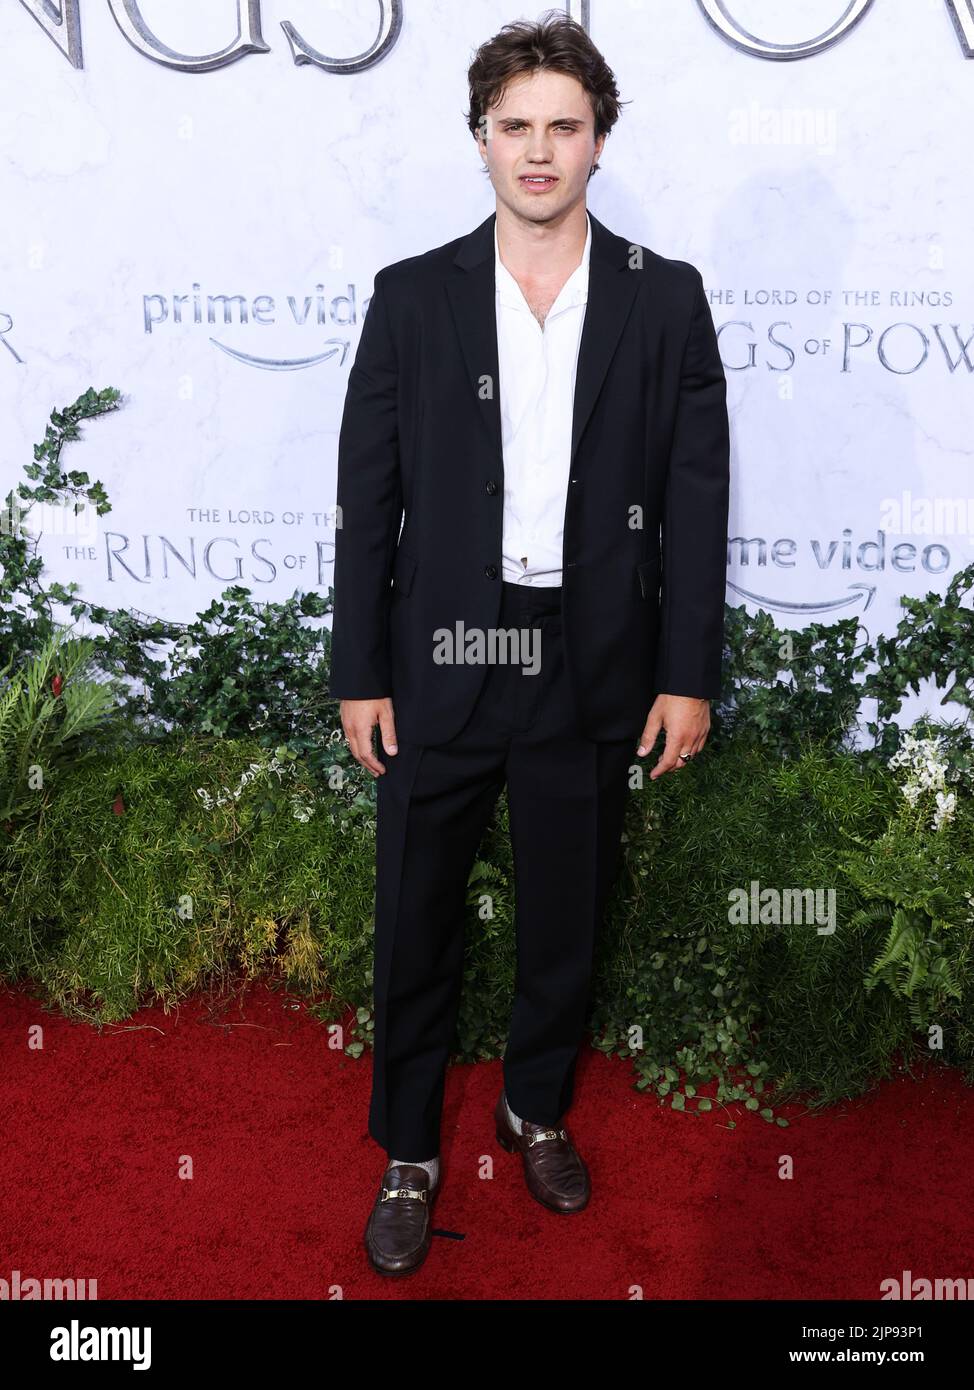 CULVER CITY, LOS ANGELES, CALIFORNIA, USA - AUGUST 15: George Sear arrives at the Los Angeles Premiere Of Amazon Prime Video's 'The Lord Of The Rings: The Rings Of Power' Season 1 held at The Culver Studios on August 15, 2022 in Culver City, Los Angeles, California, United States. (Photo by Xavier Collin/Image Press Agency) Stock Photo